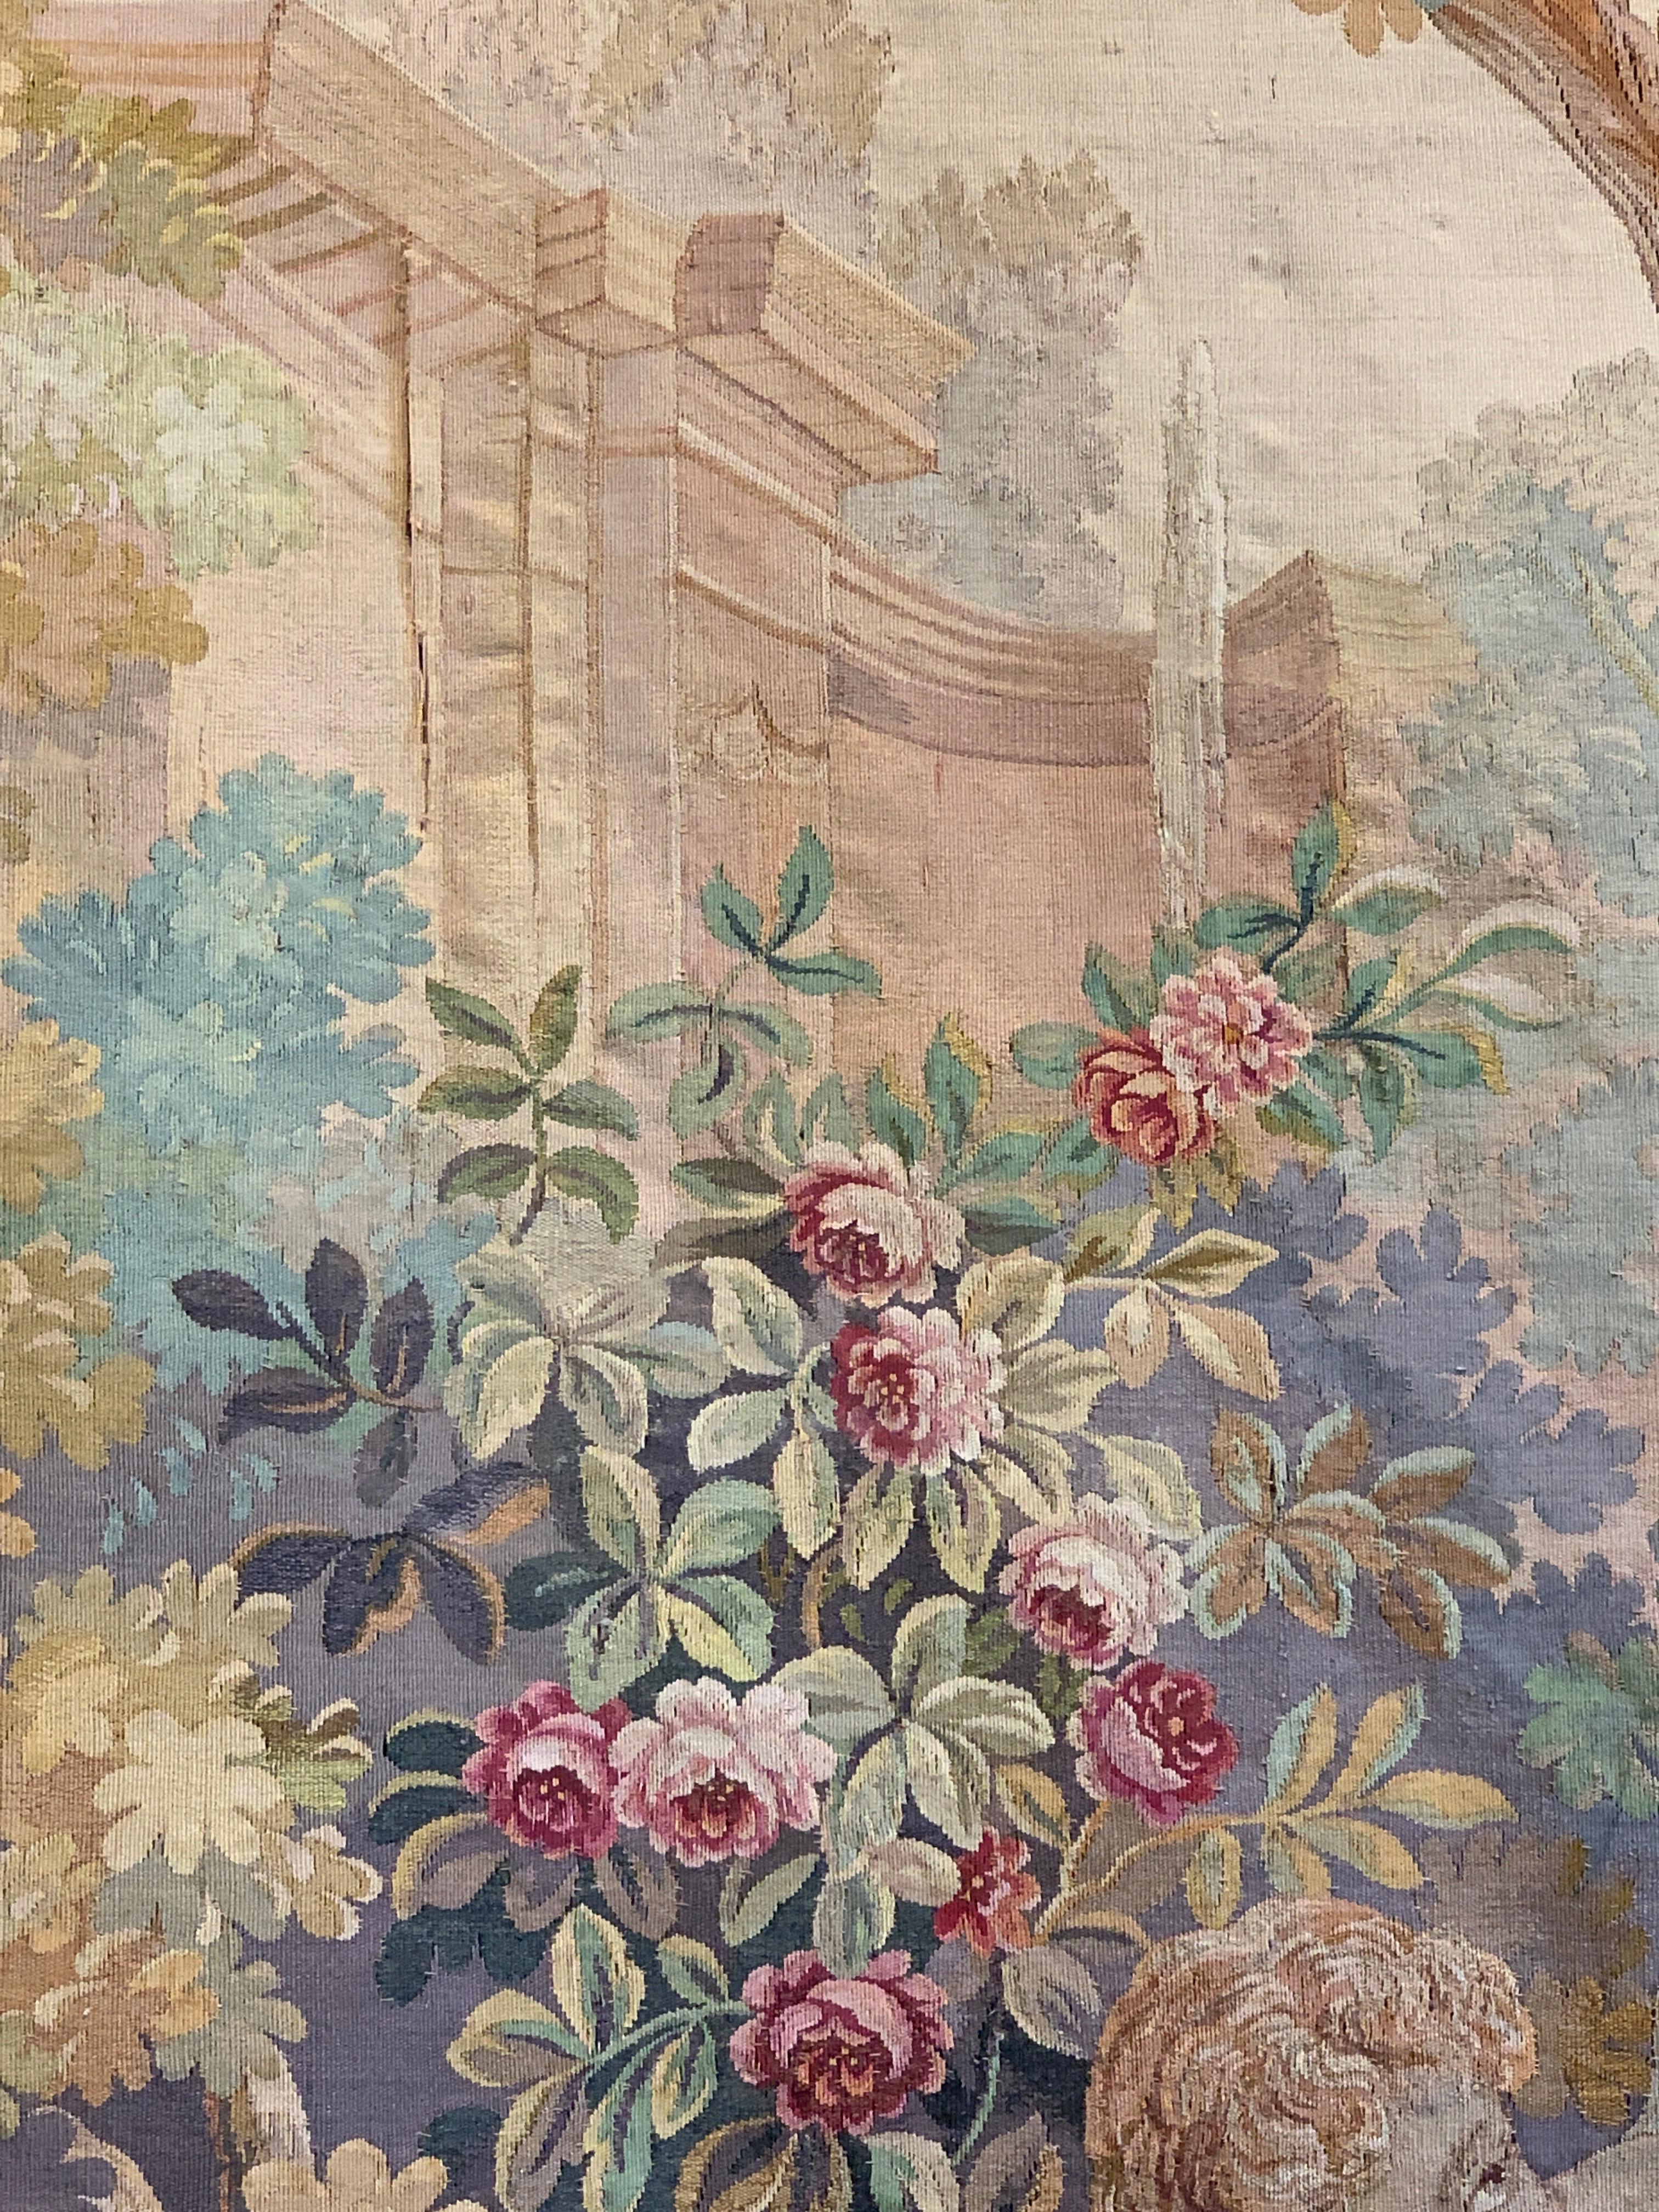 19th Century French Aubusson Allegorical Wall Tapestry 2